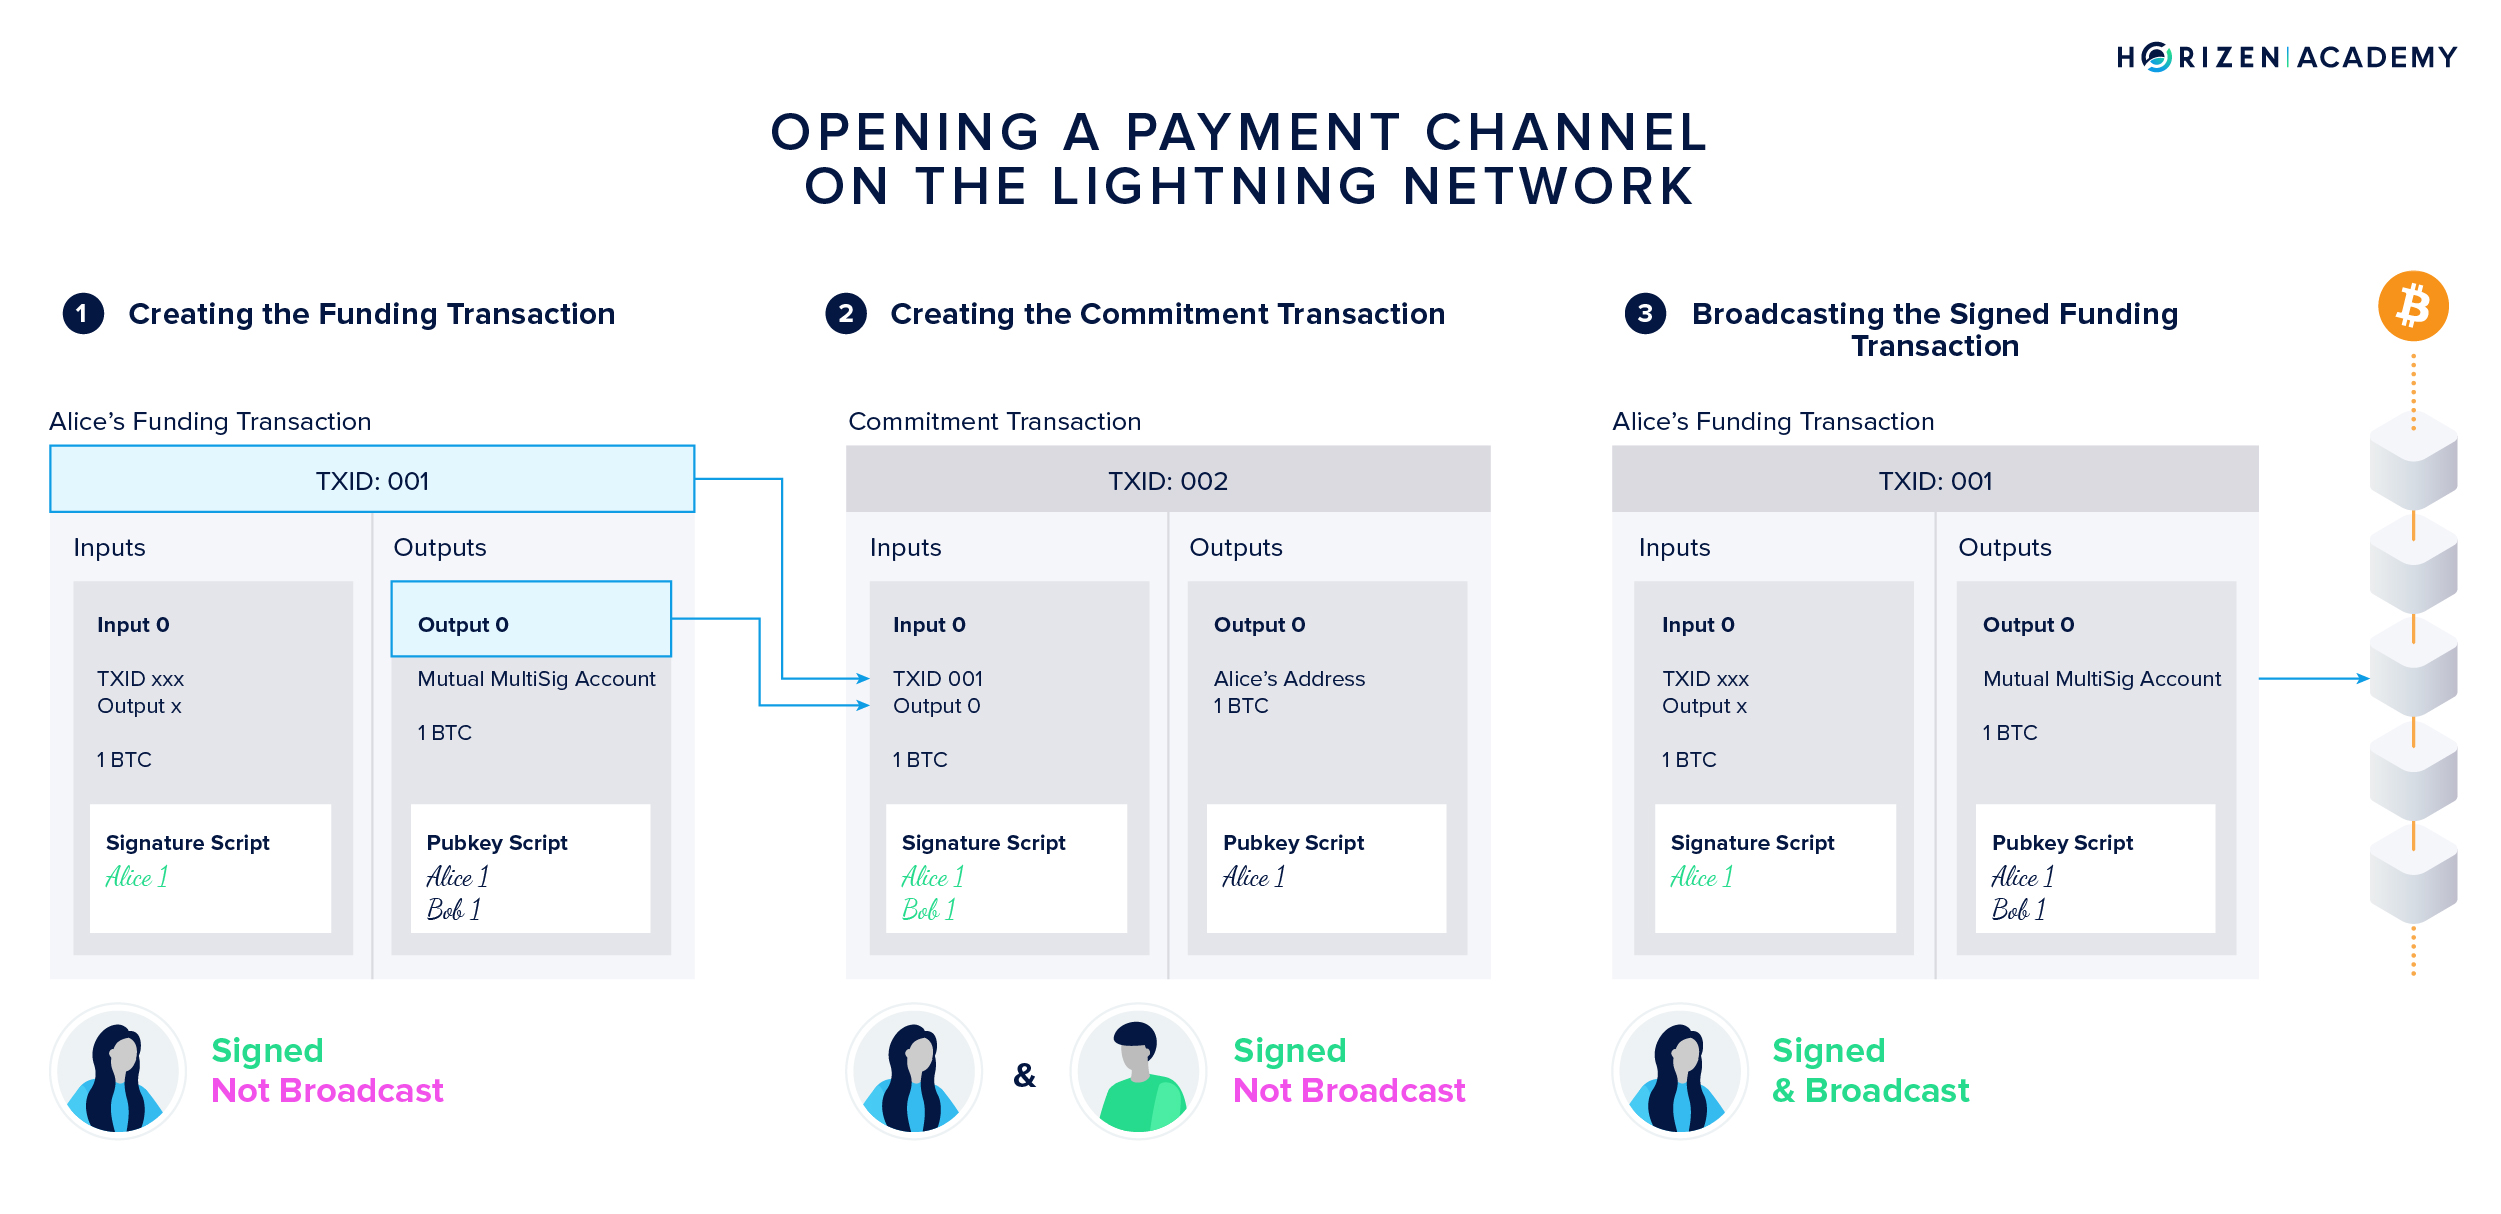 Unilateral payment channel funding and opening